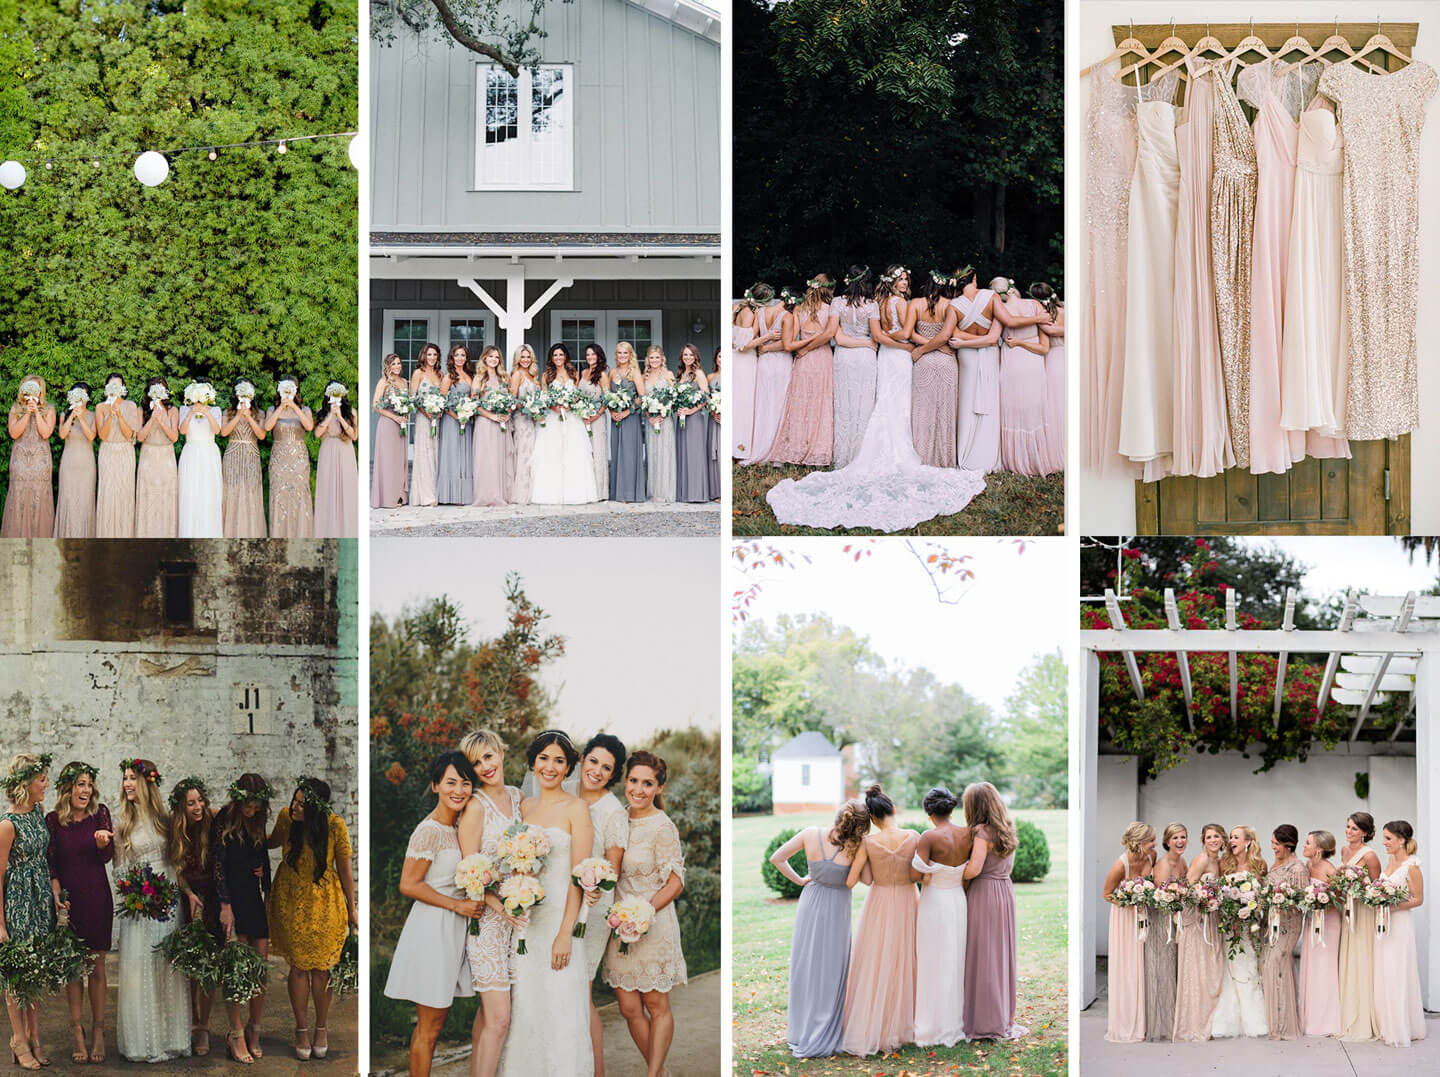 mixed-or-matched-bridesmaid-dresses-trends-2016-collage-via-the-gay-wedding-guide